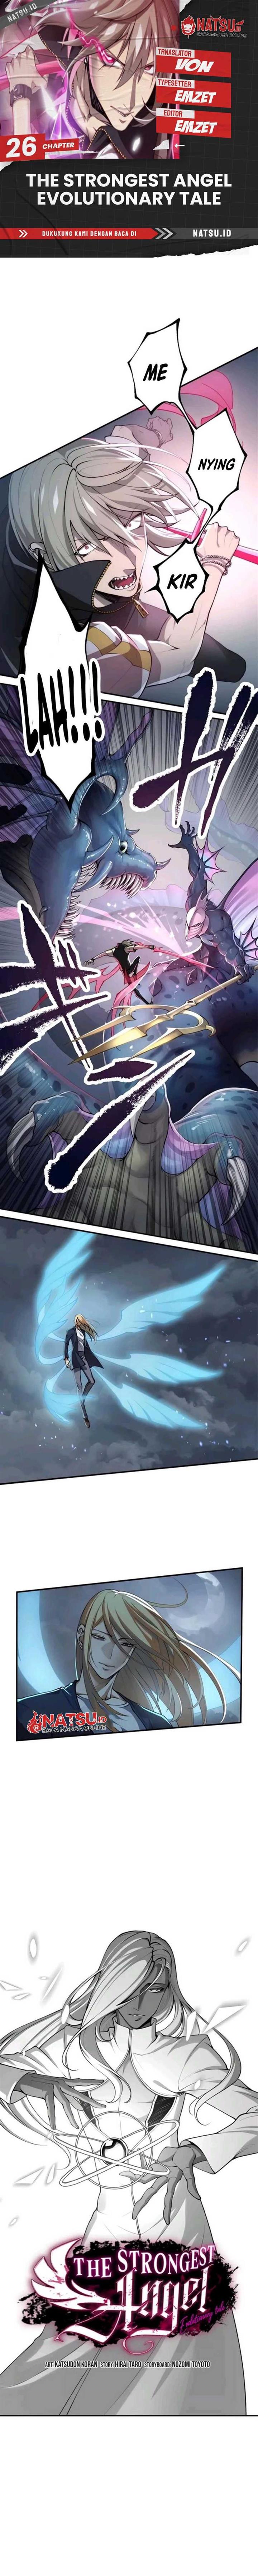 The Strongest Angel Evolutionary Tale Chapter 26